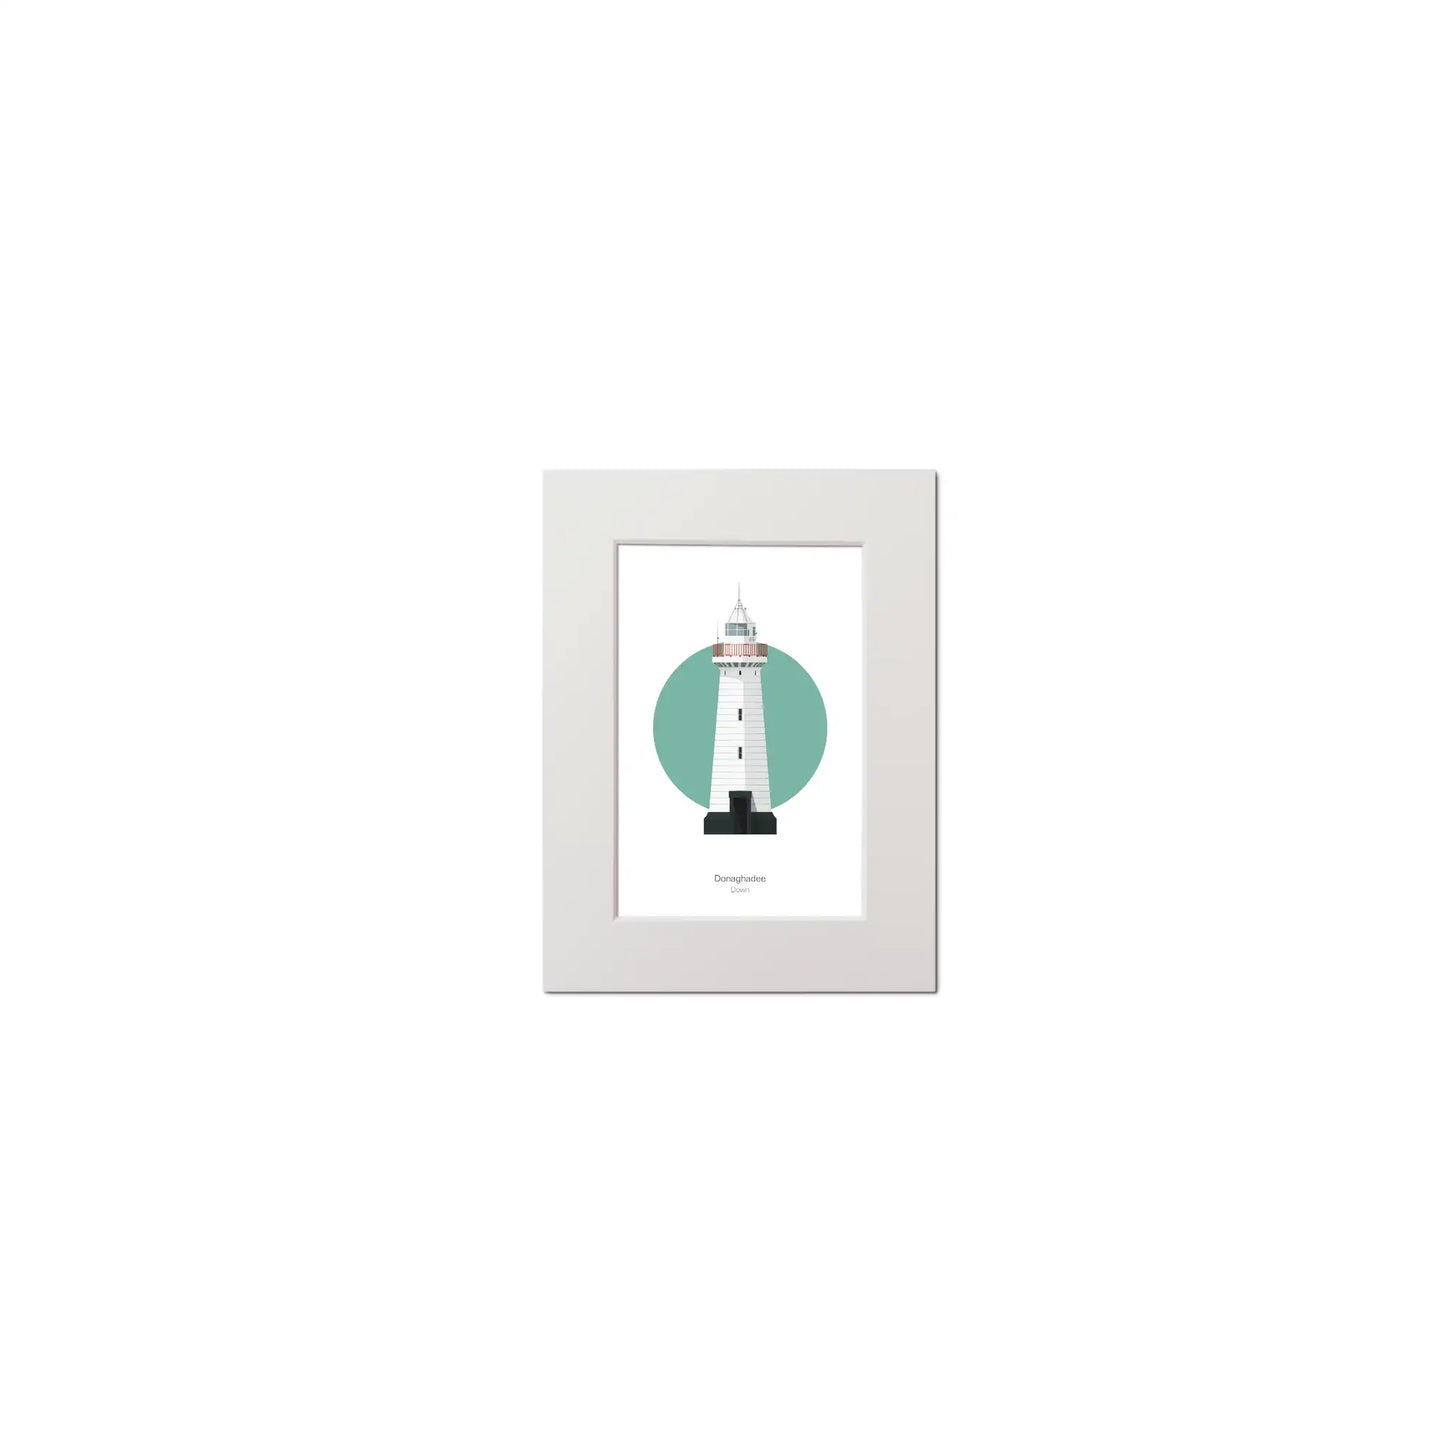 Contemporary graphic illustration of Donaghadee lighthouse on a white background inside light blue square, mounted and measuring 15x20cm.